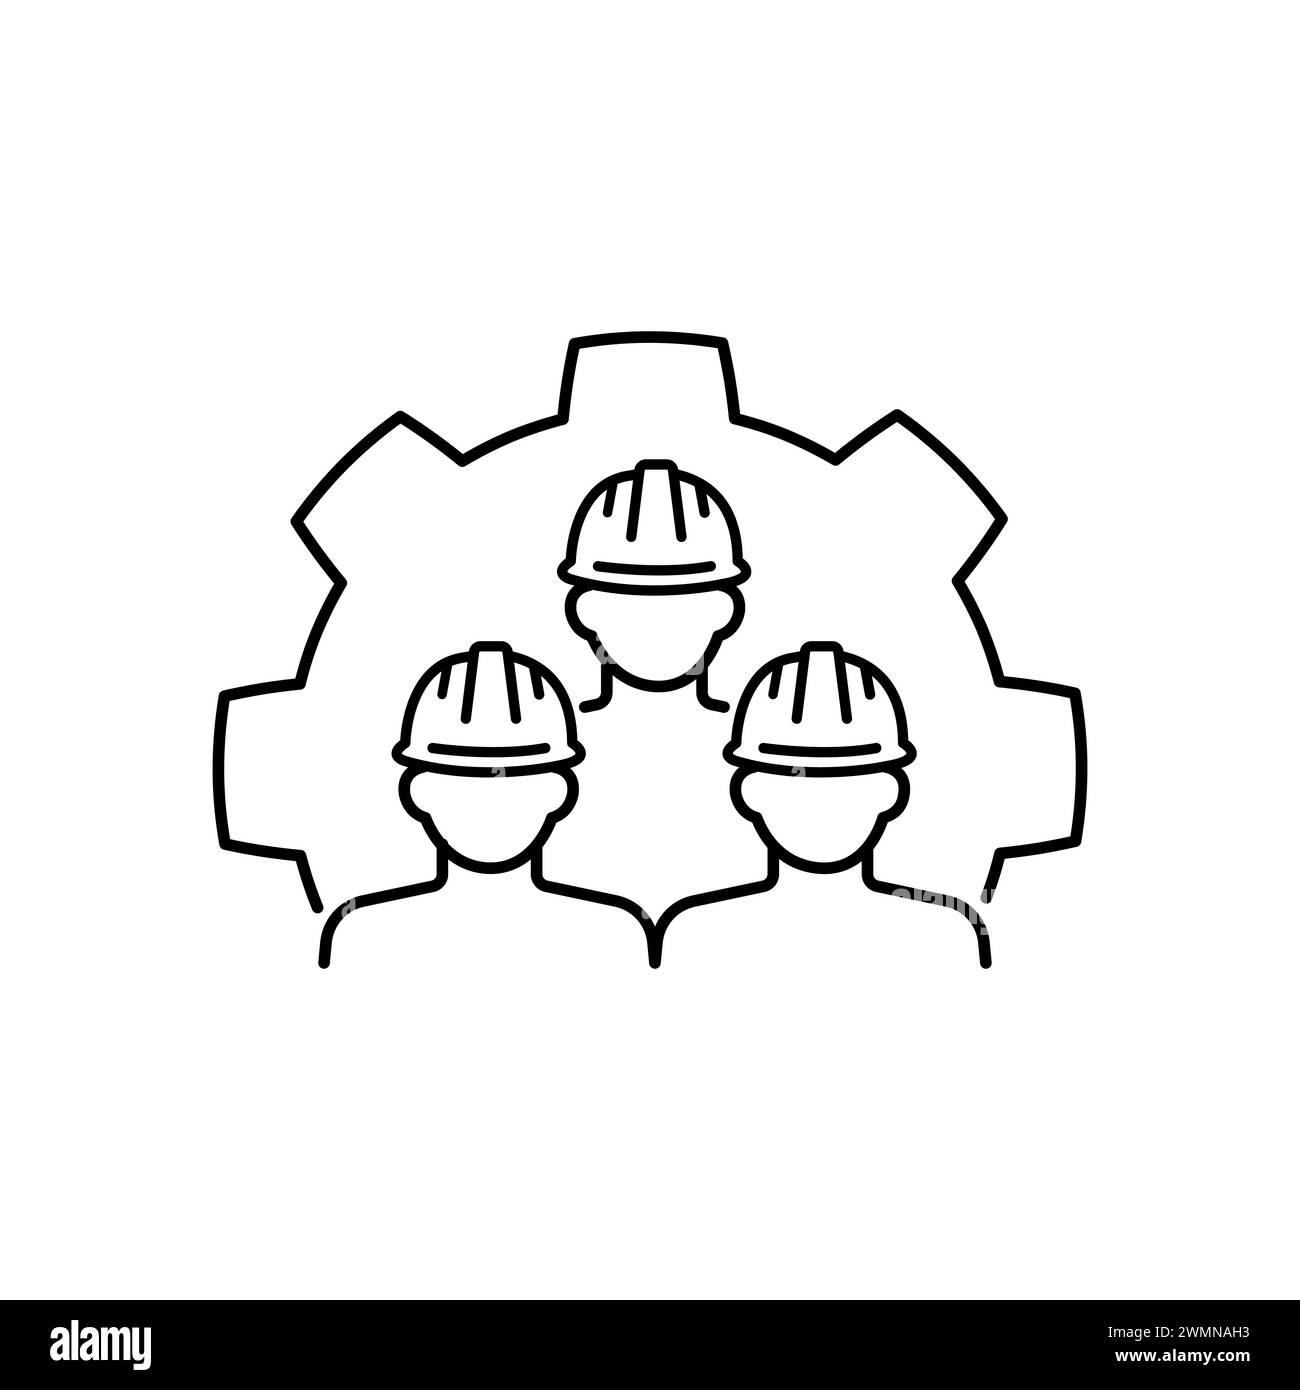 Construction management concept with icon. Architect, technician collaboration icon. team, gear, work, engineer, line, stroke. Vector illustration Des Stock Vector